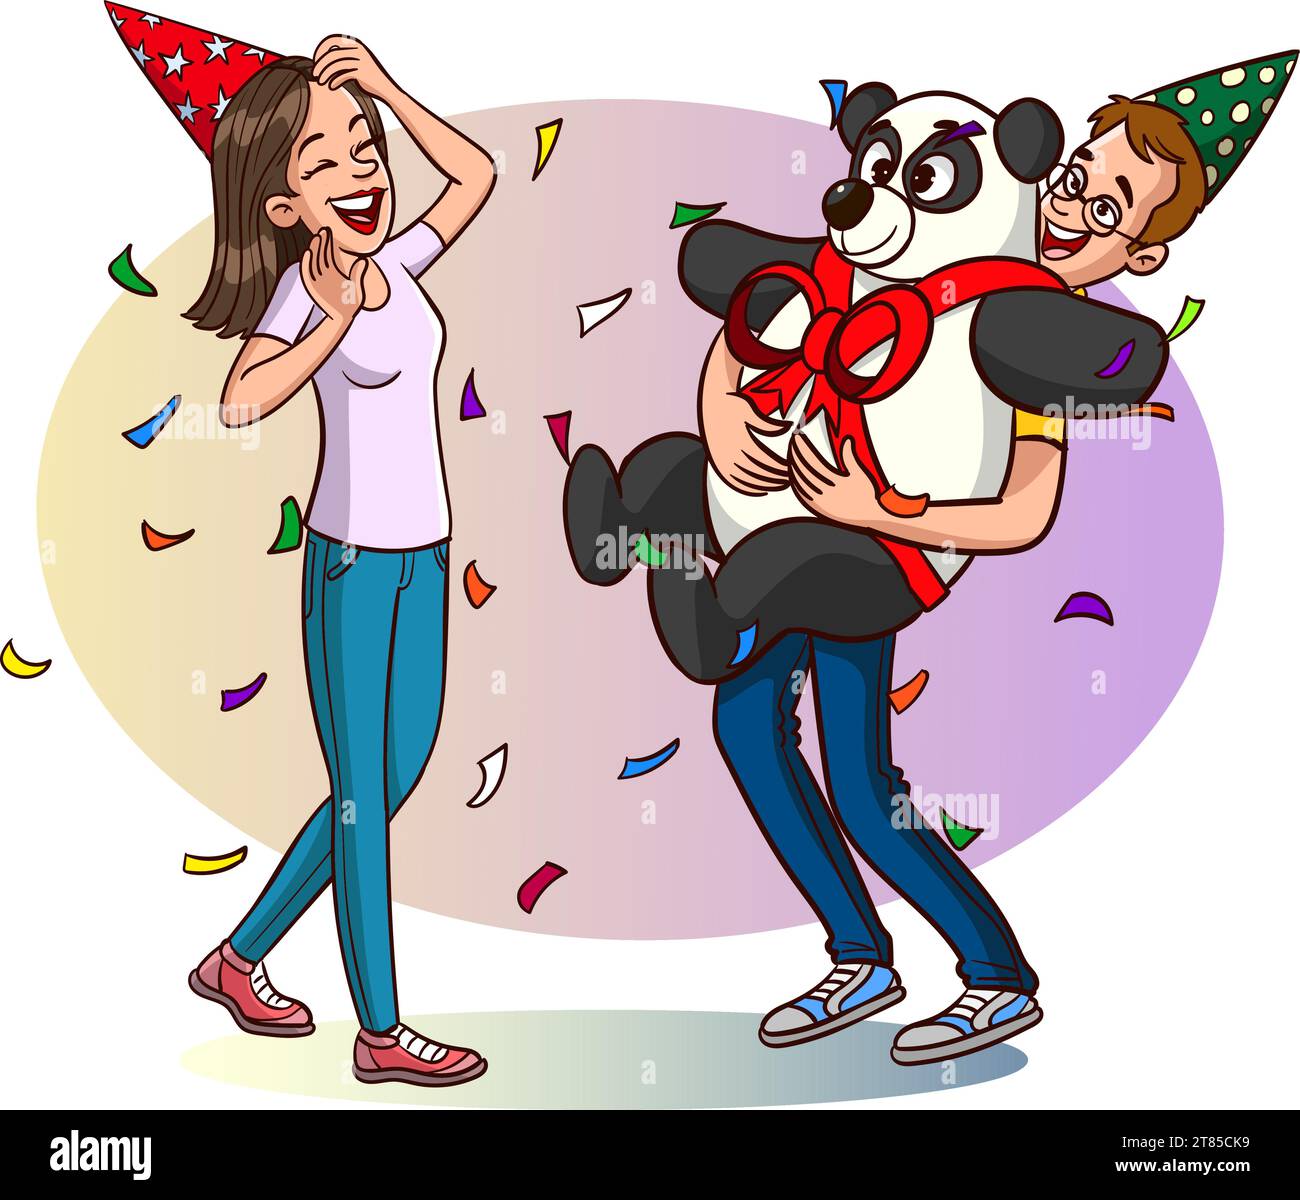 bought a gift for their friend. giving a gift to his friend Stock Vector